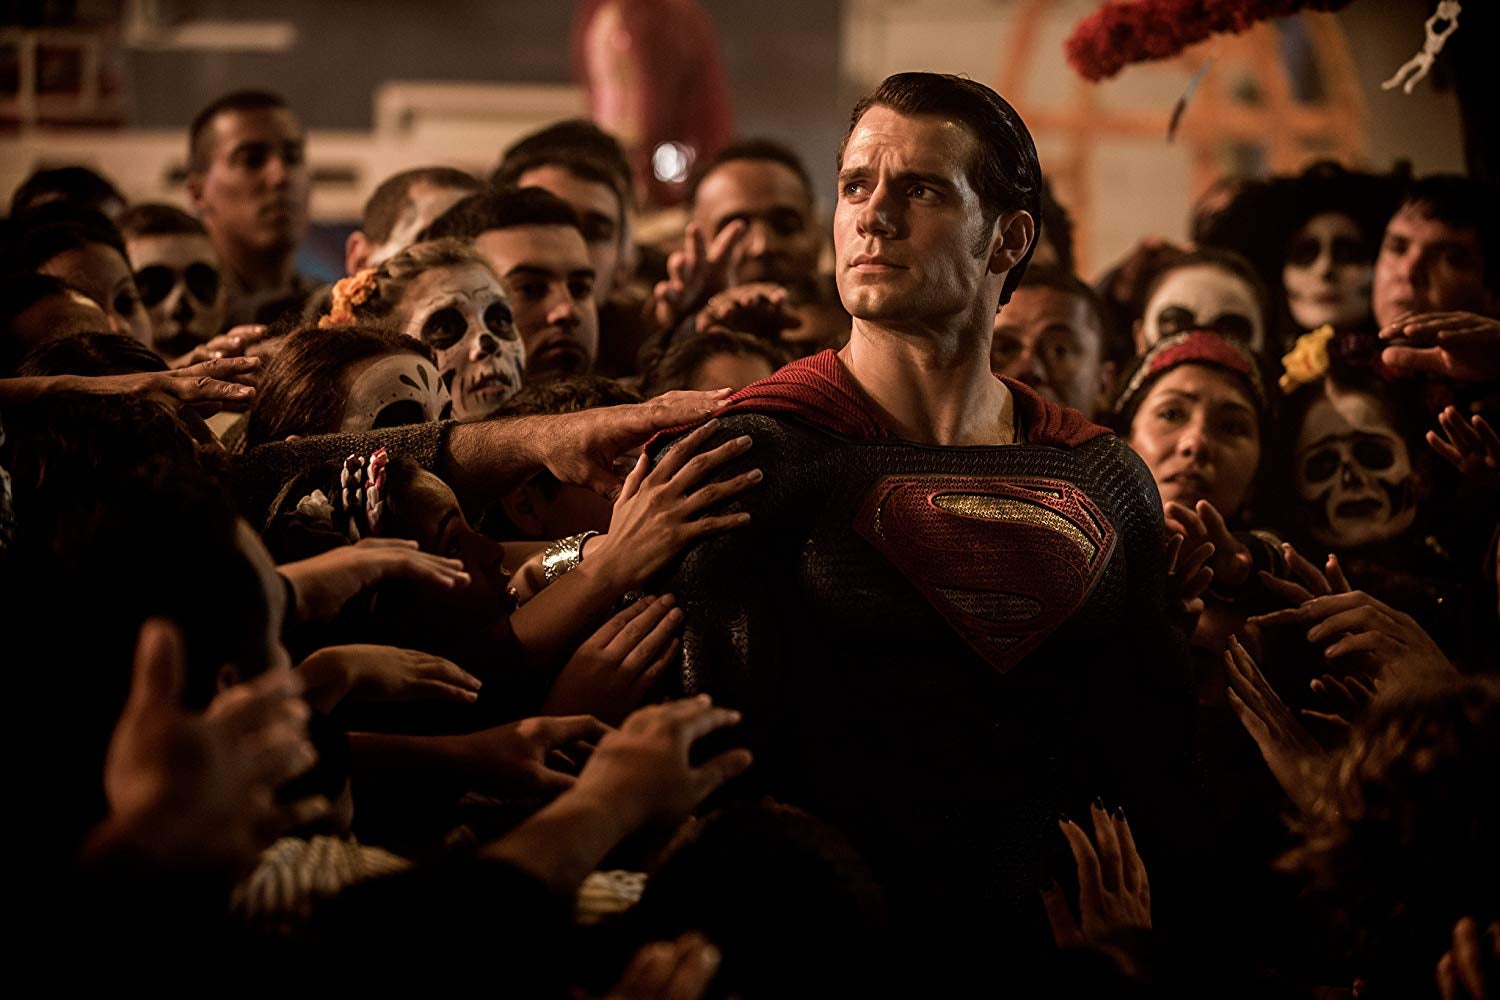 Henry Cavill Says He's No Longer Playing Superman